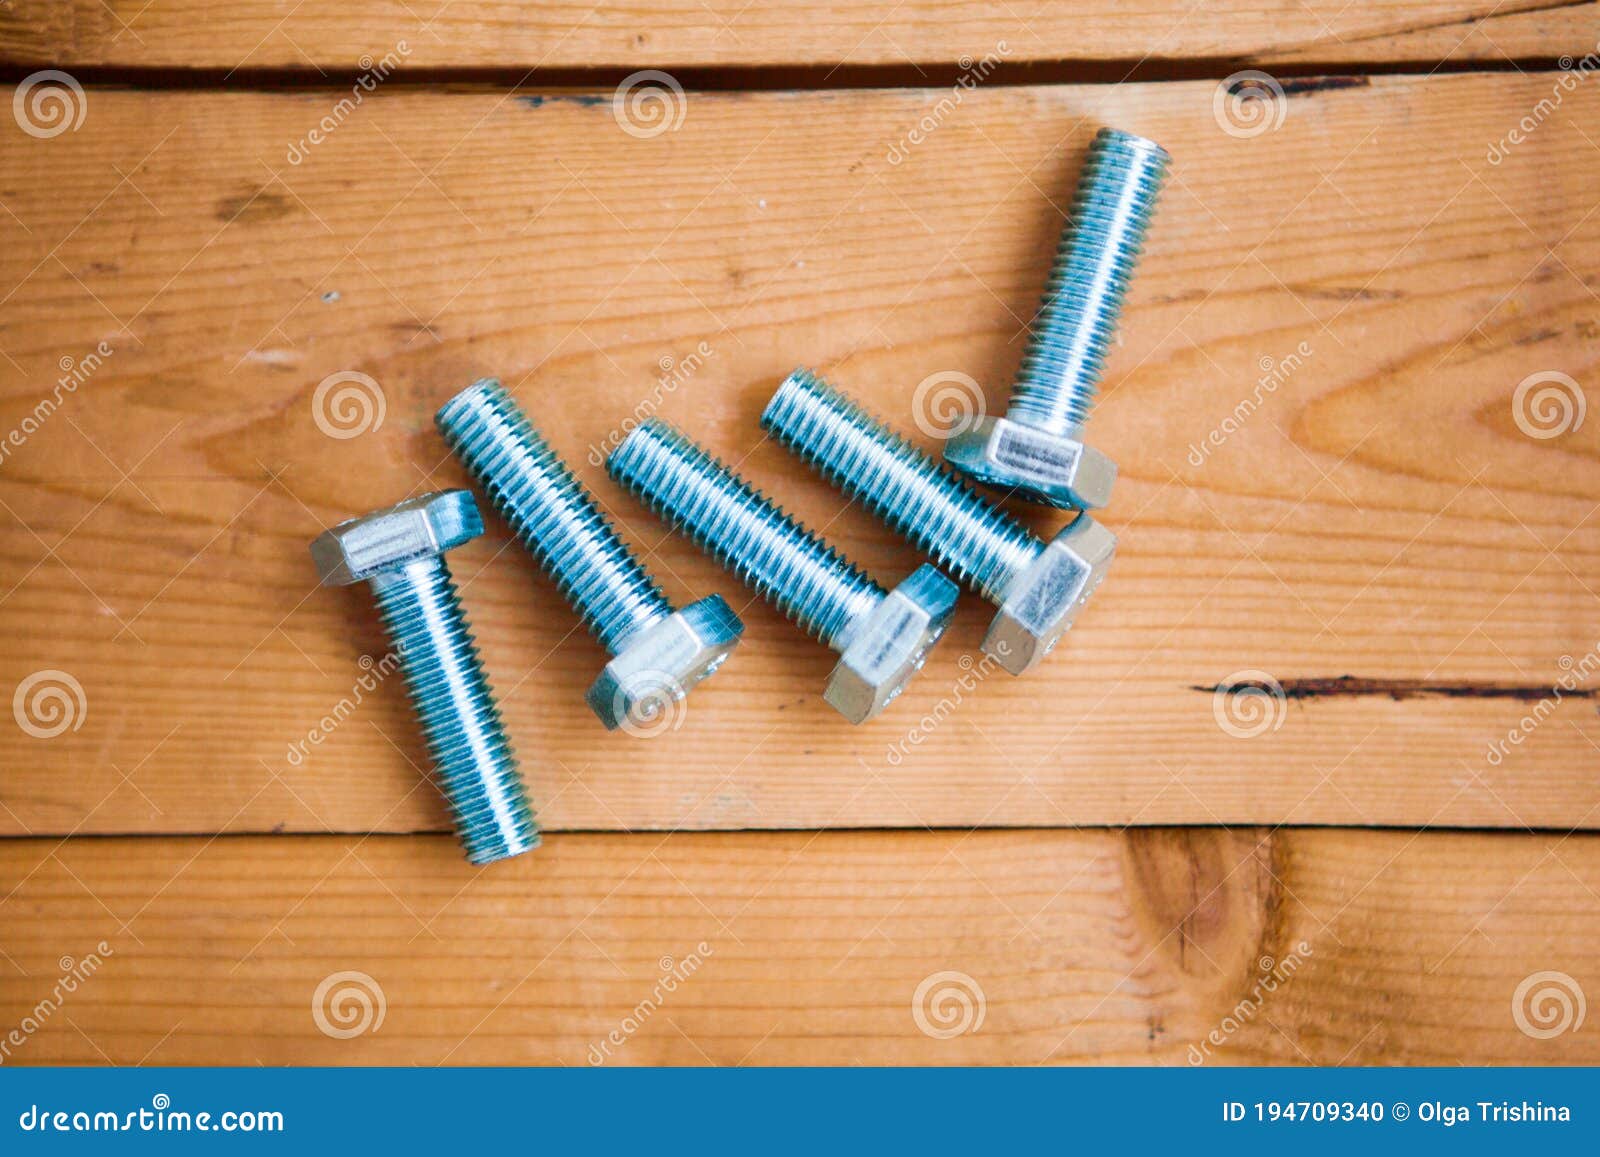 set of metalware on the wooden background